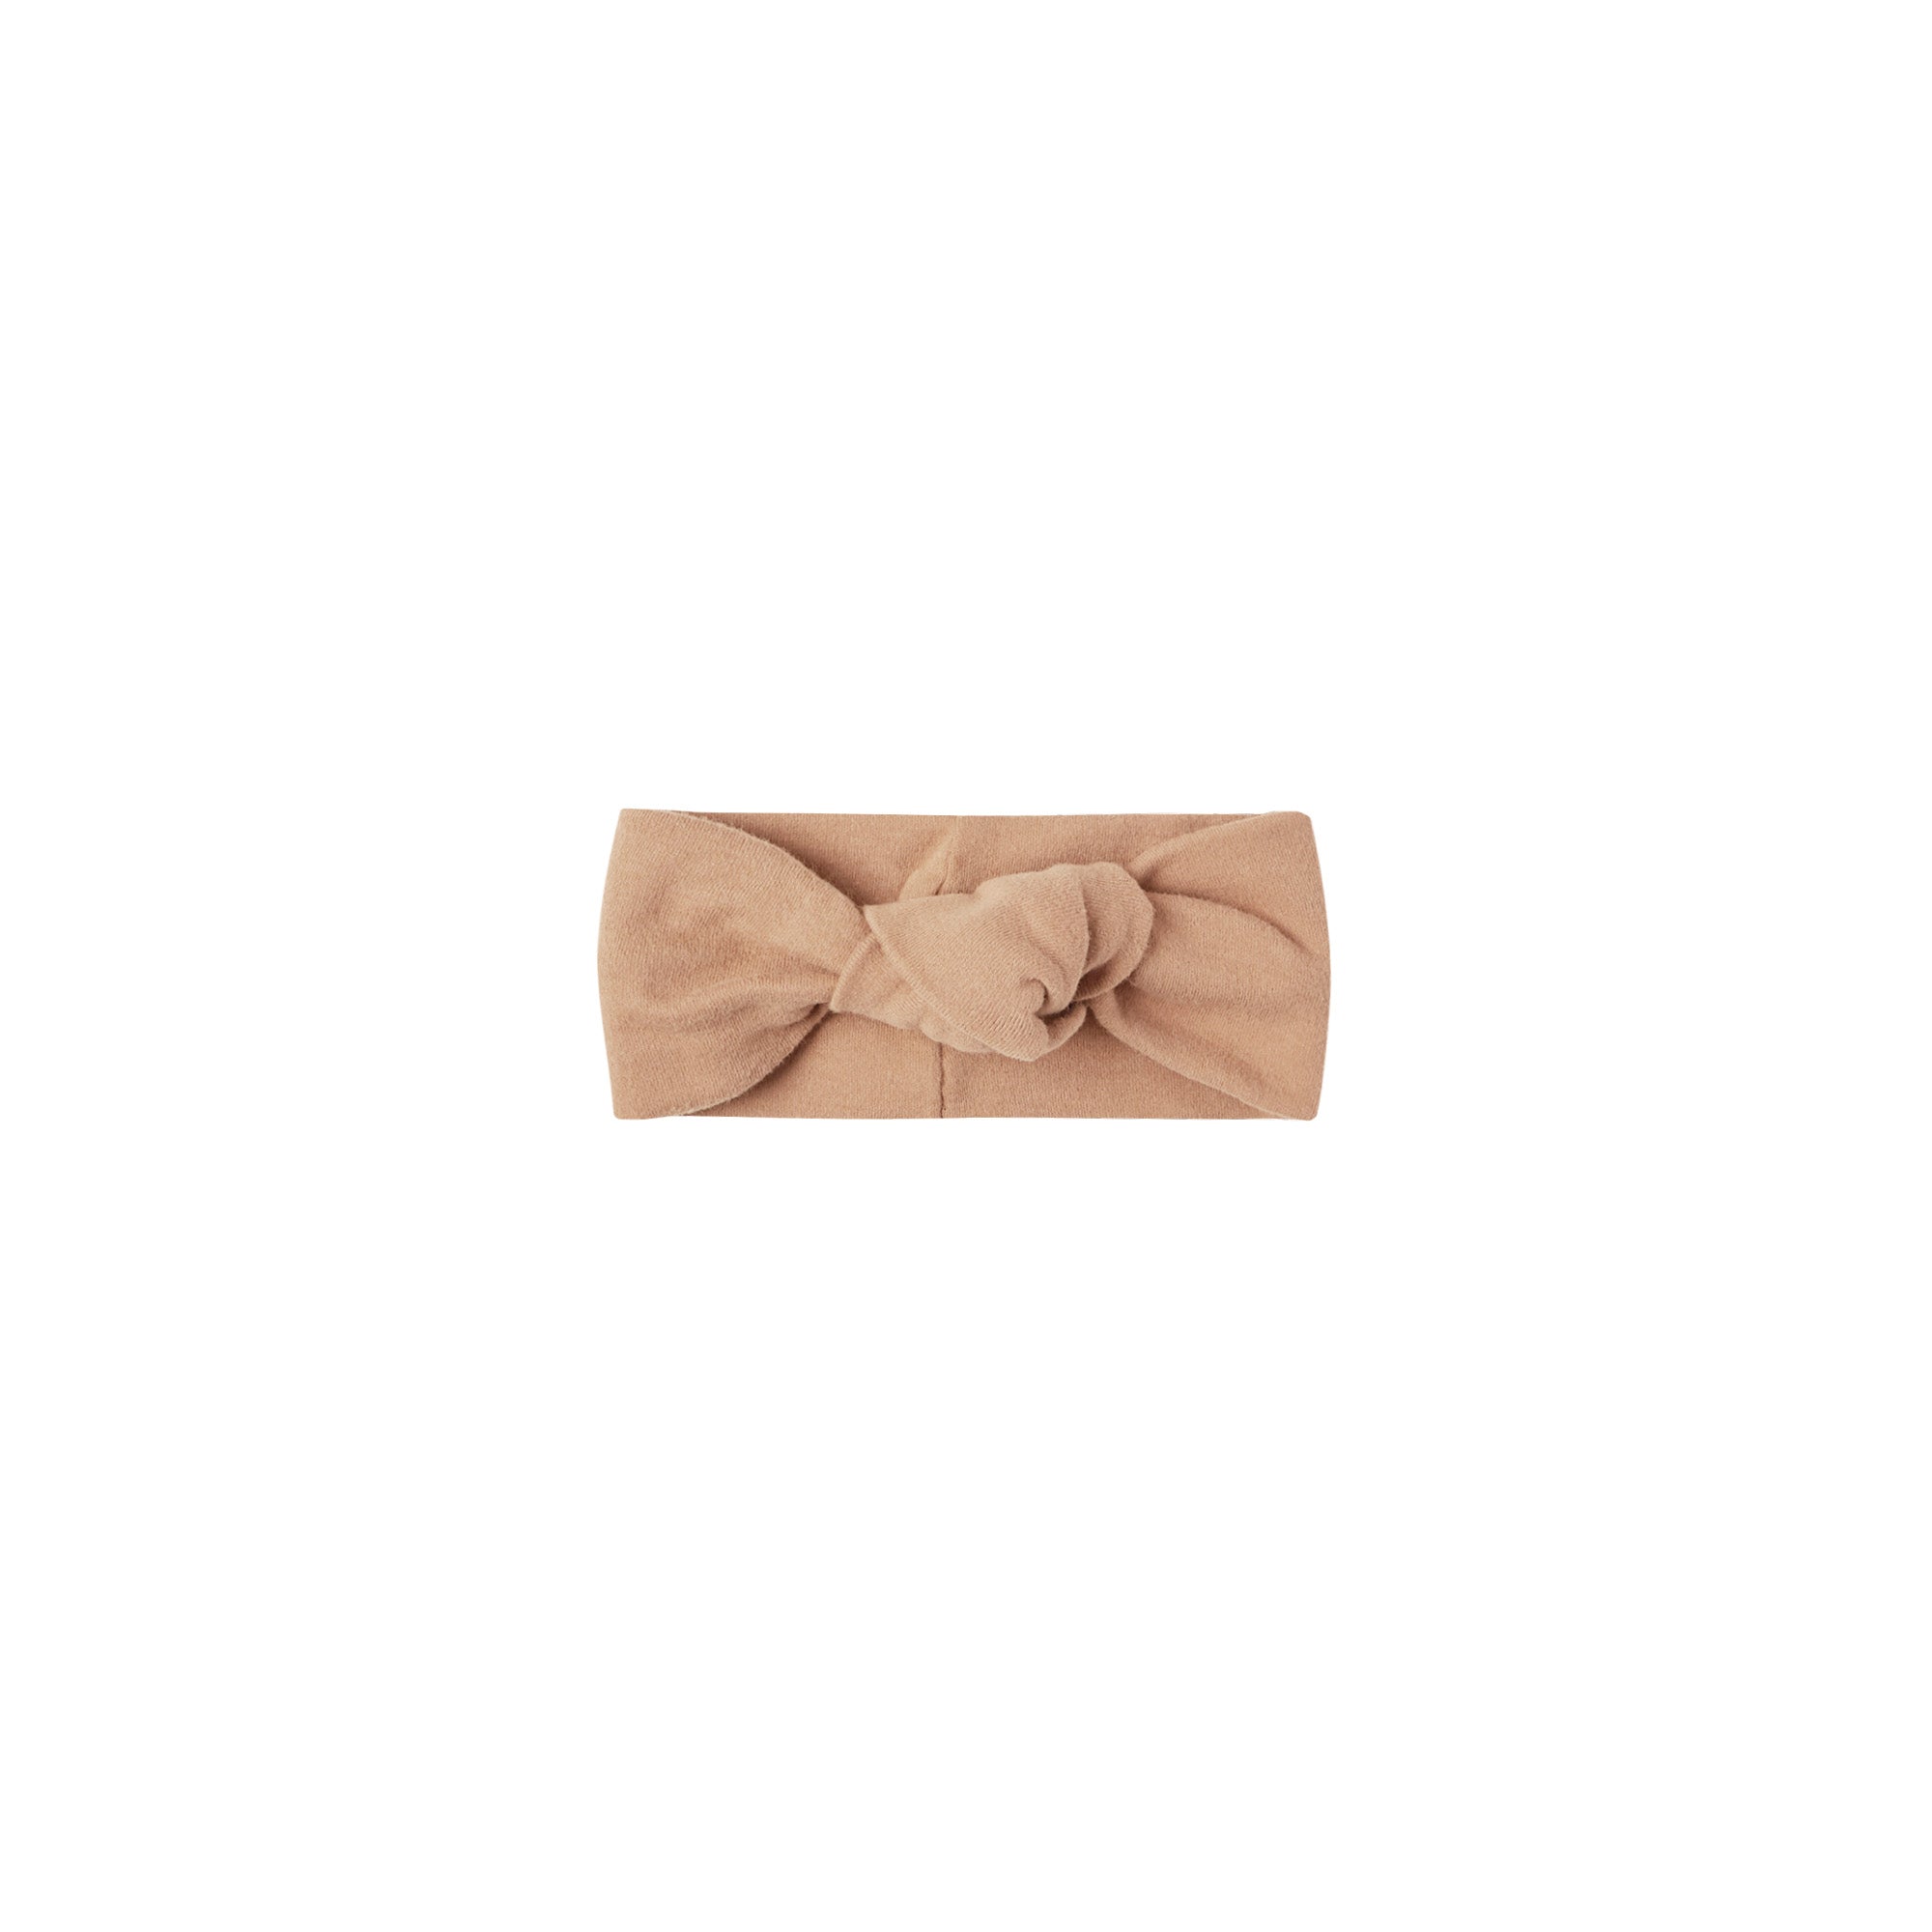 Quincy Mae_Knotted Headband Apricot_Headwear